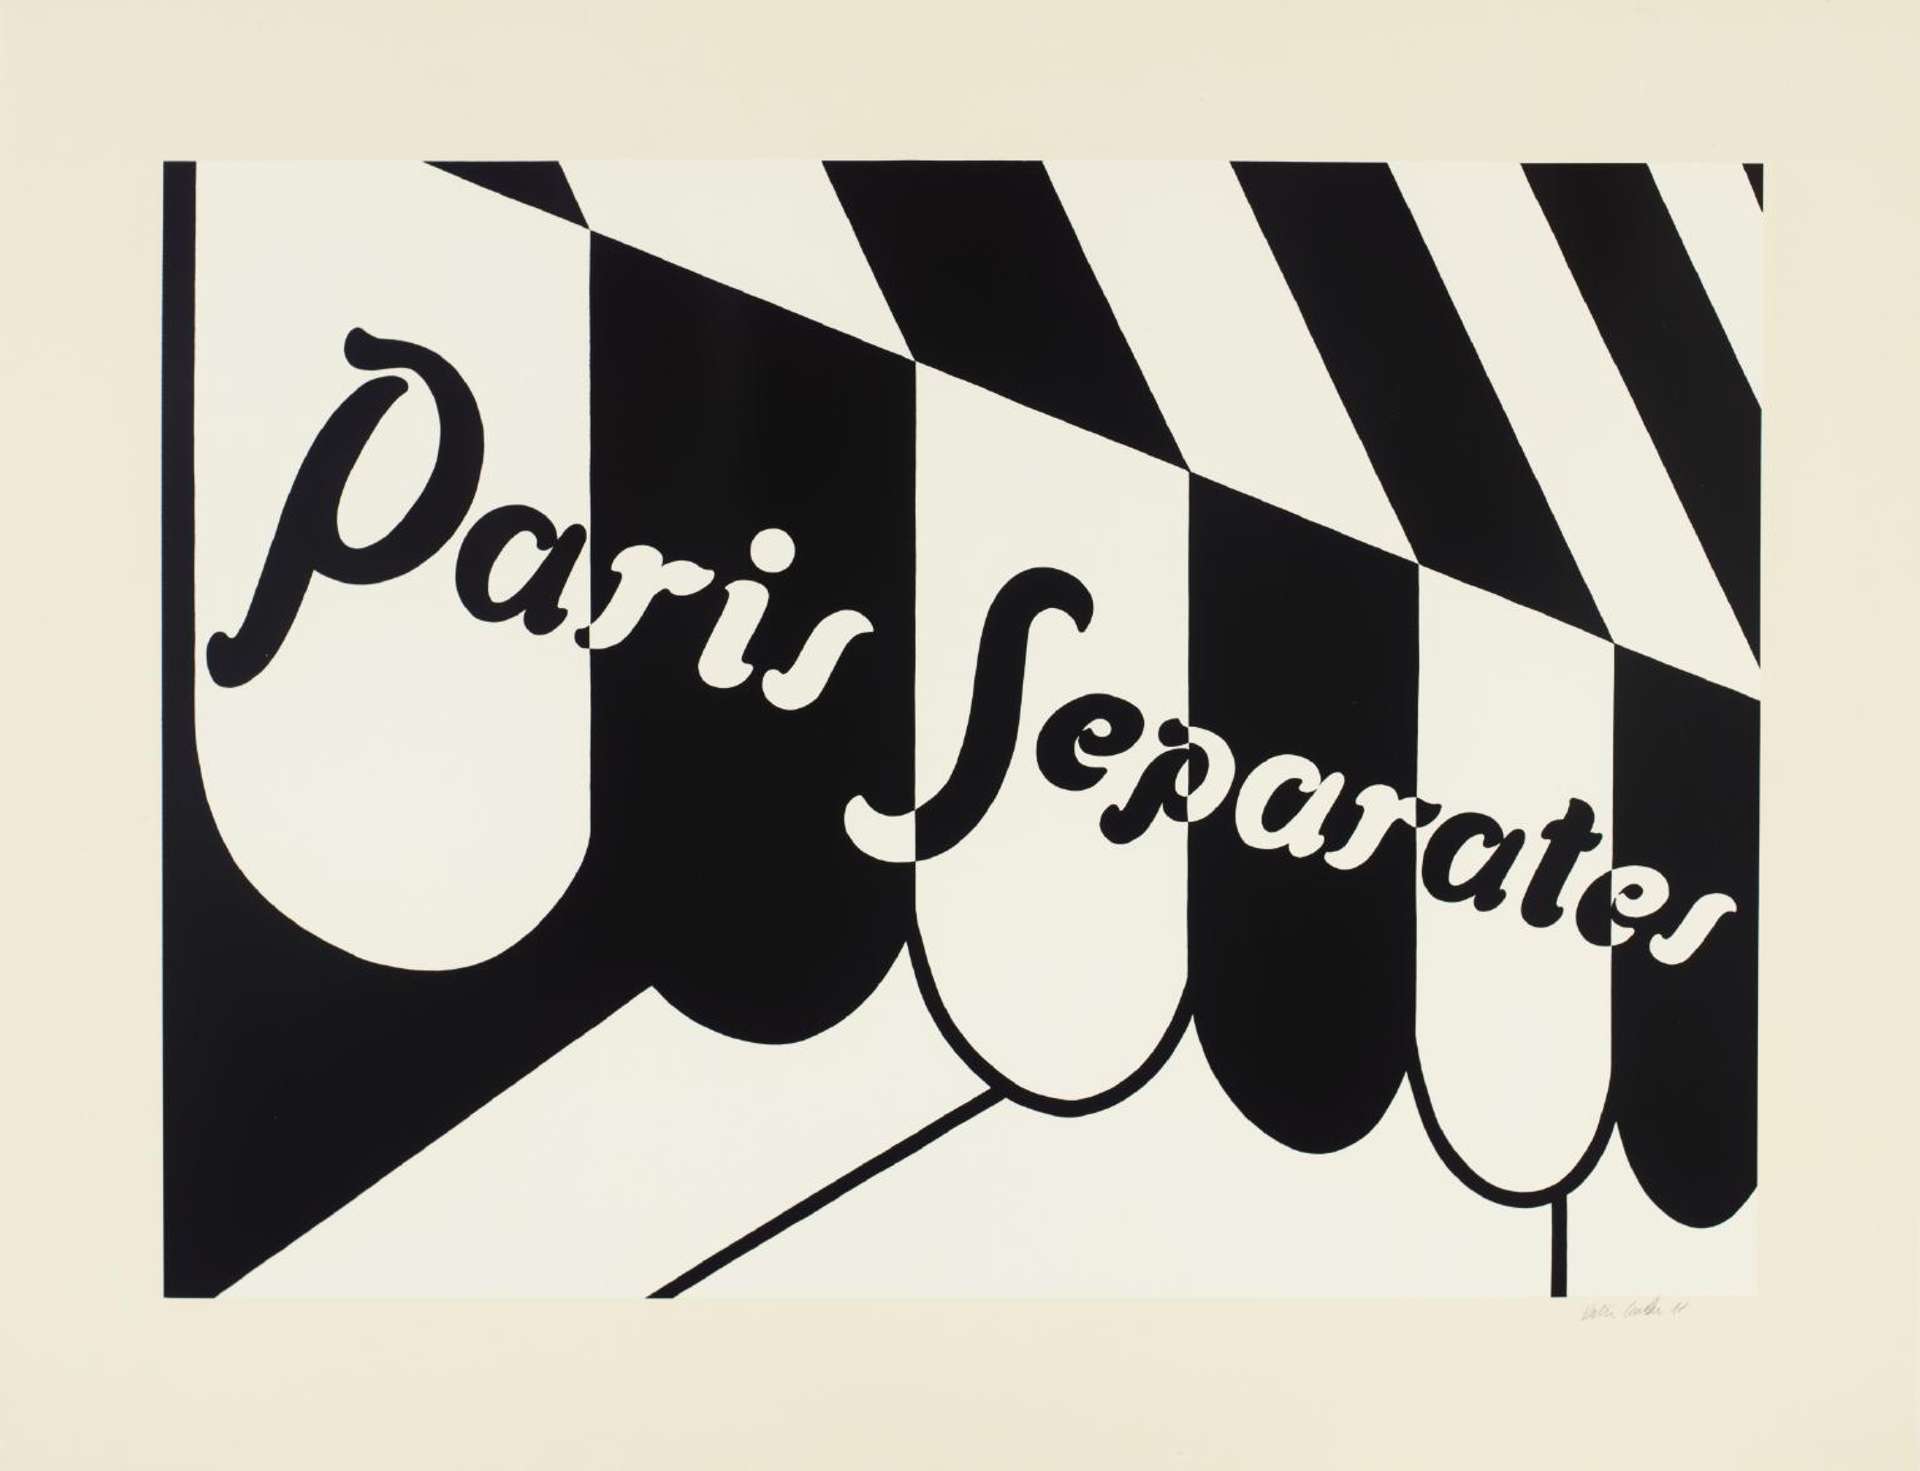 An image of the print Paris Separates by Patrick Caulfield, which is a monochrome depiction of a striped awning.